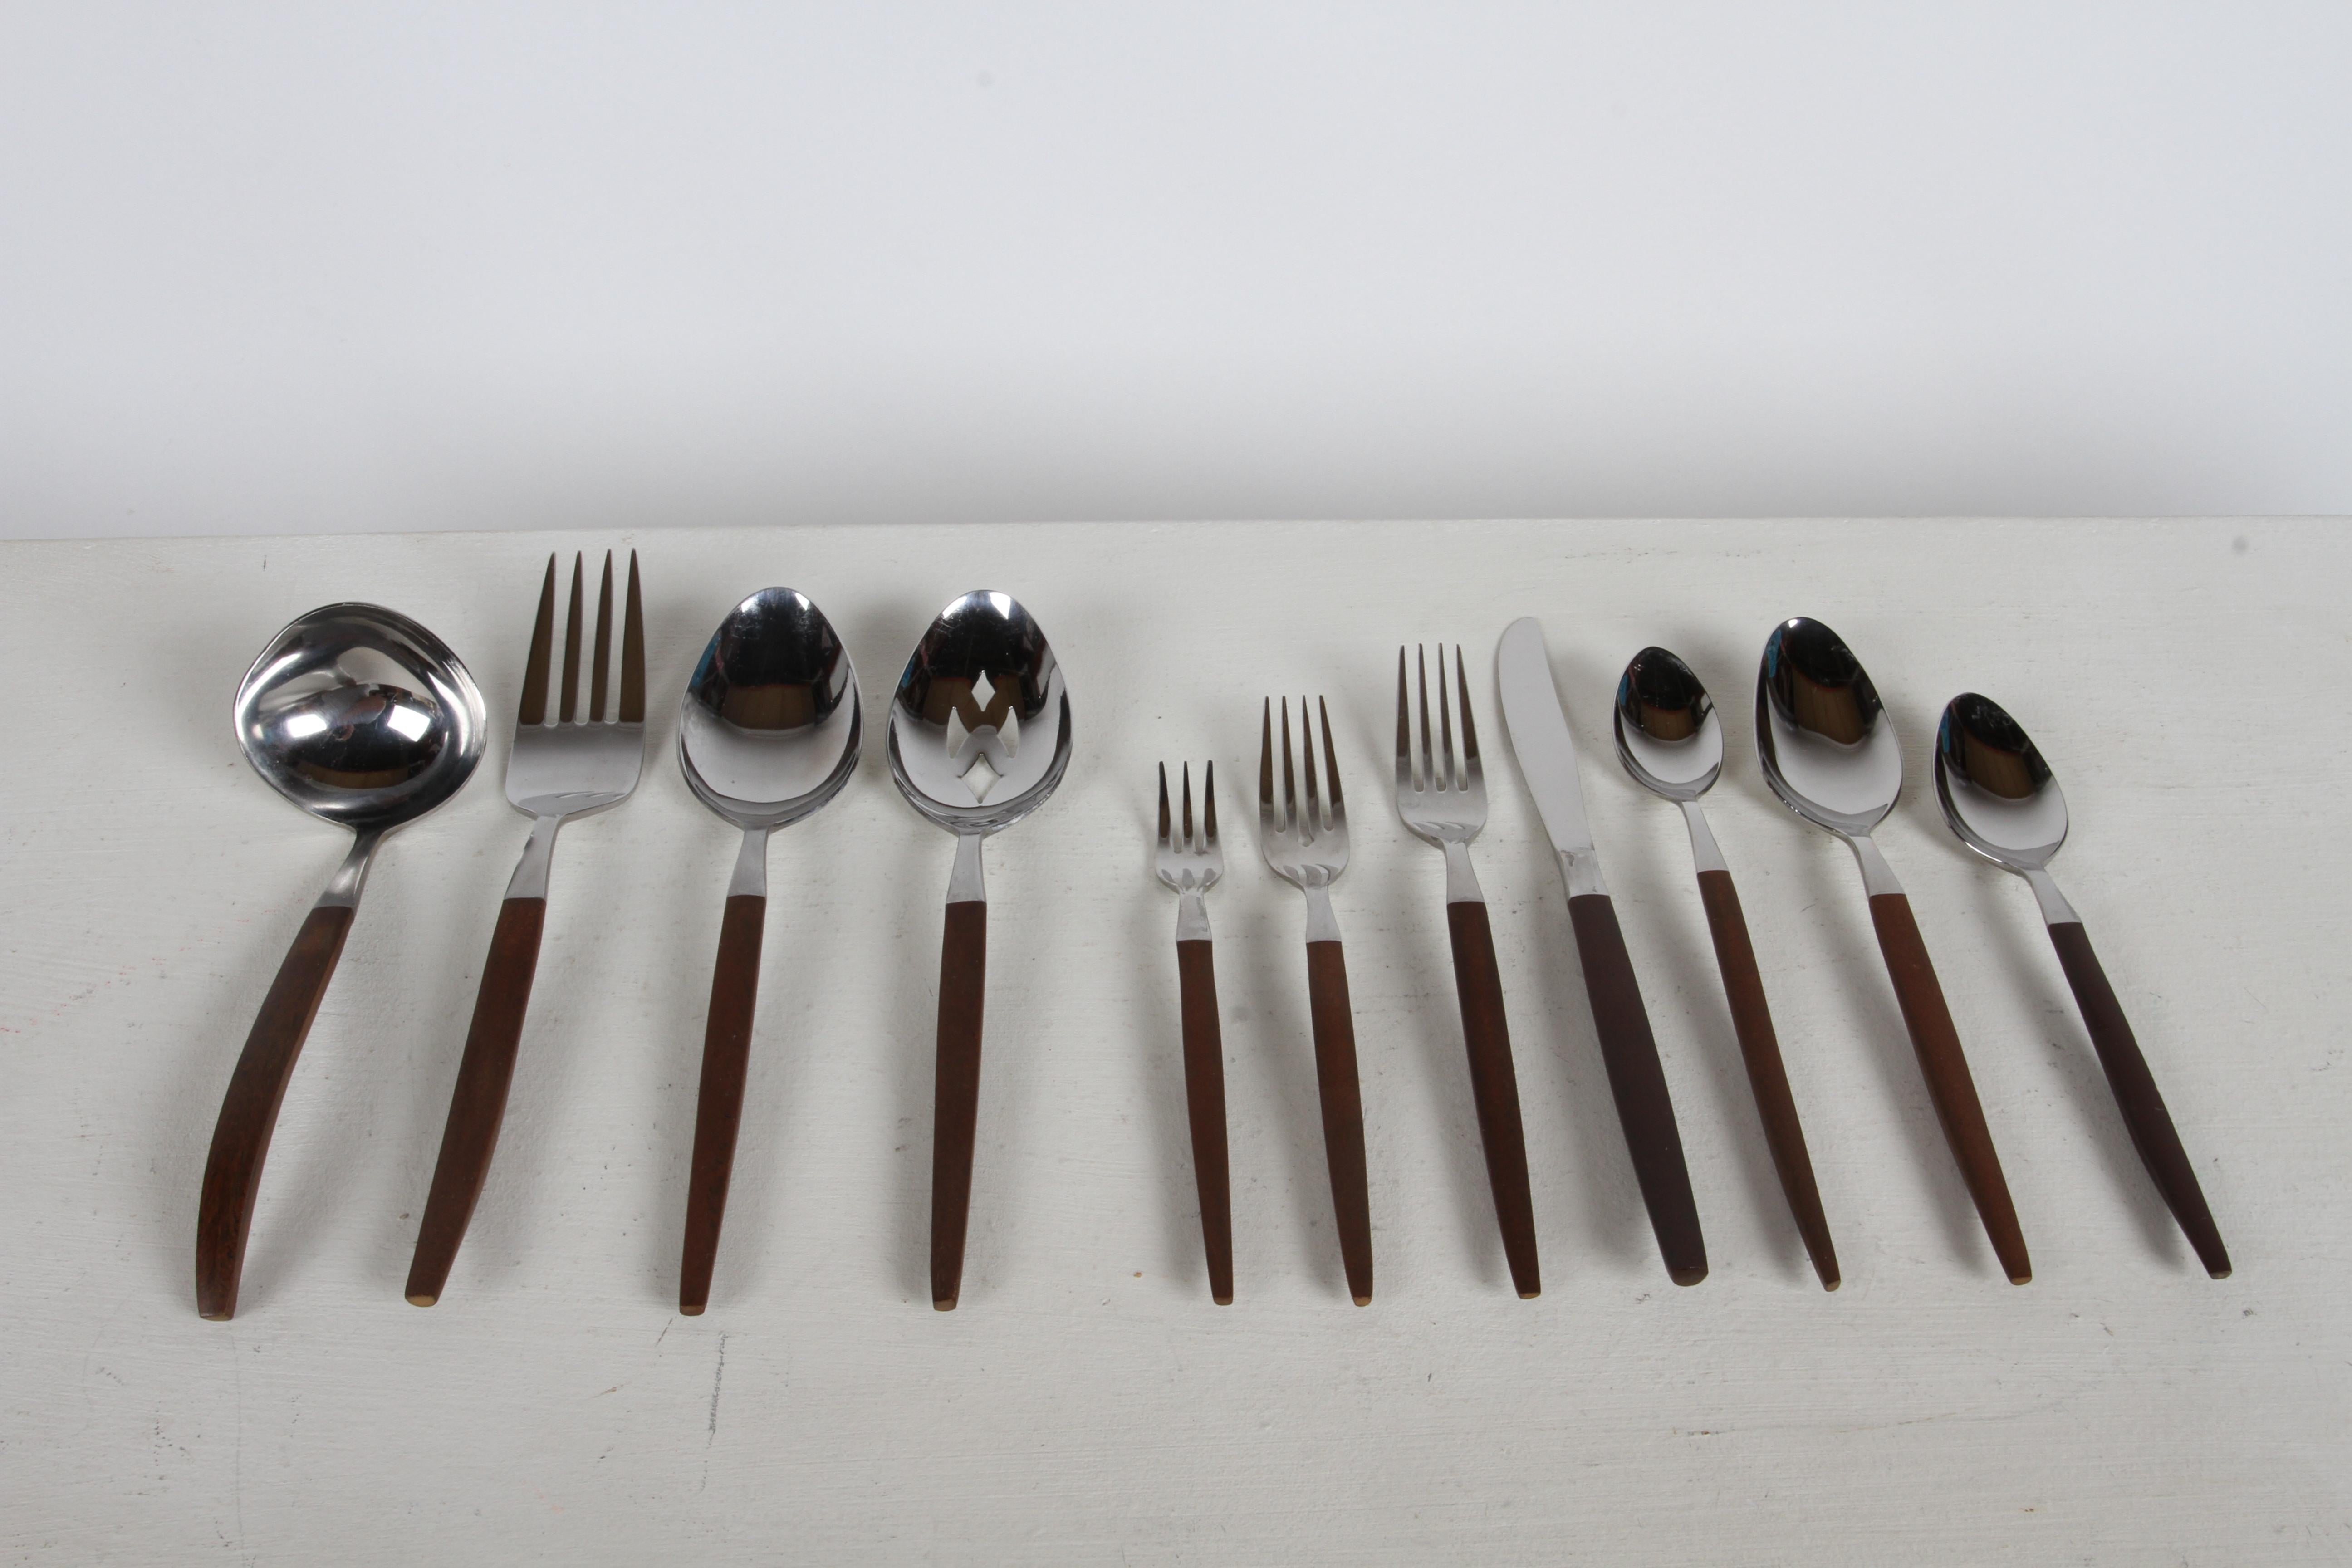 Classic Danish influenced Mid-Century sleek modernist designed stainless flatware / silverware set & serving pieces designed and sold by EKCO Products International and produced in Japan, circa 1960s. This set is from the EKCO Eterna 